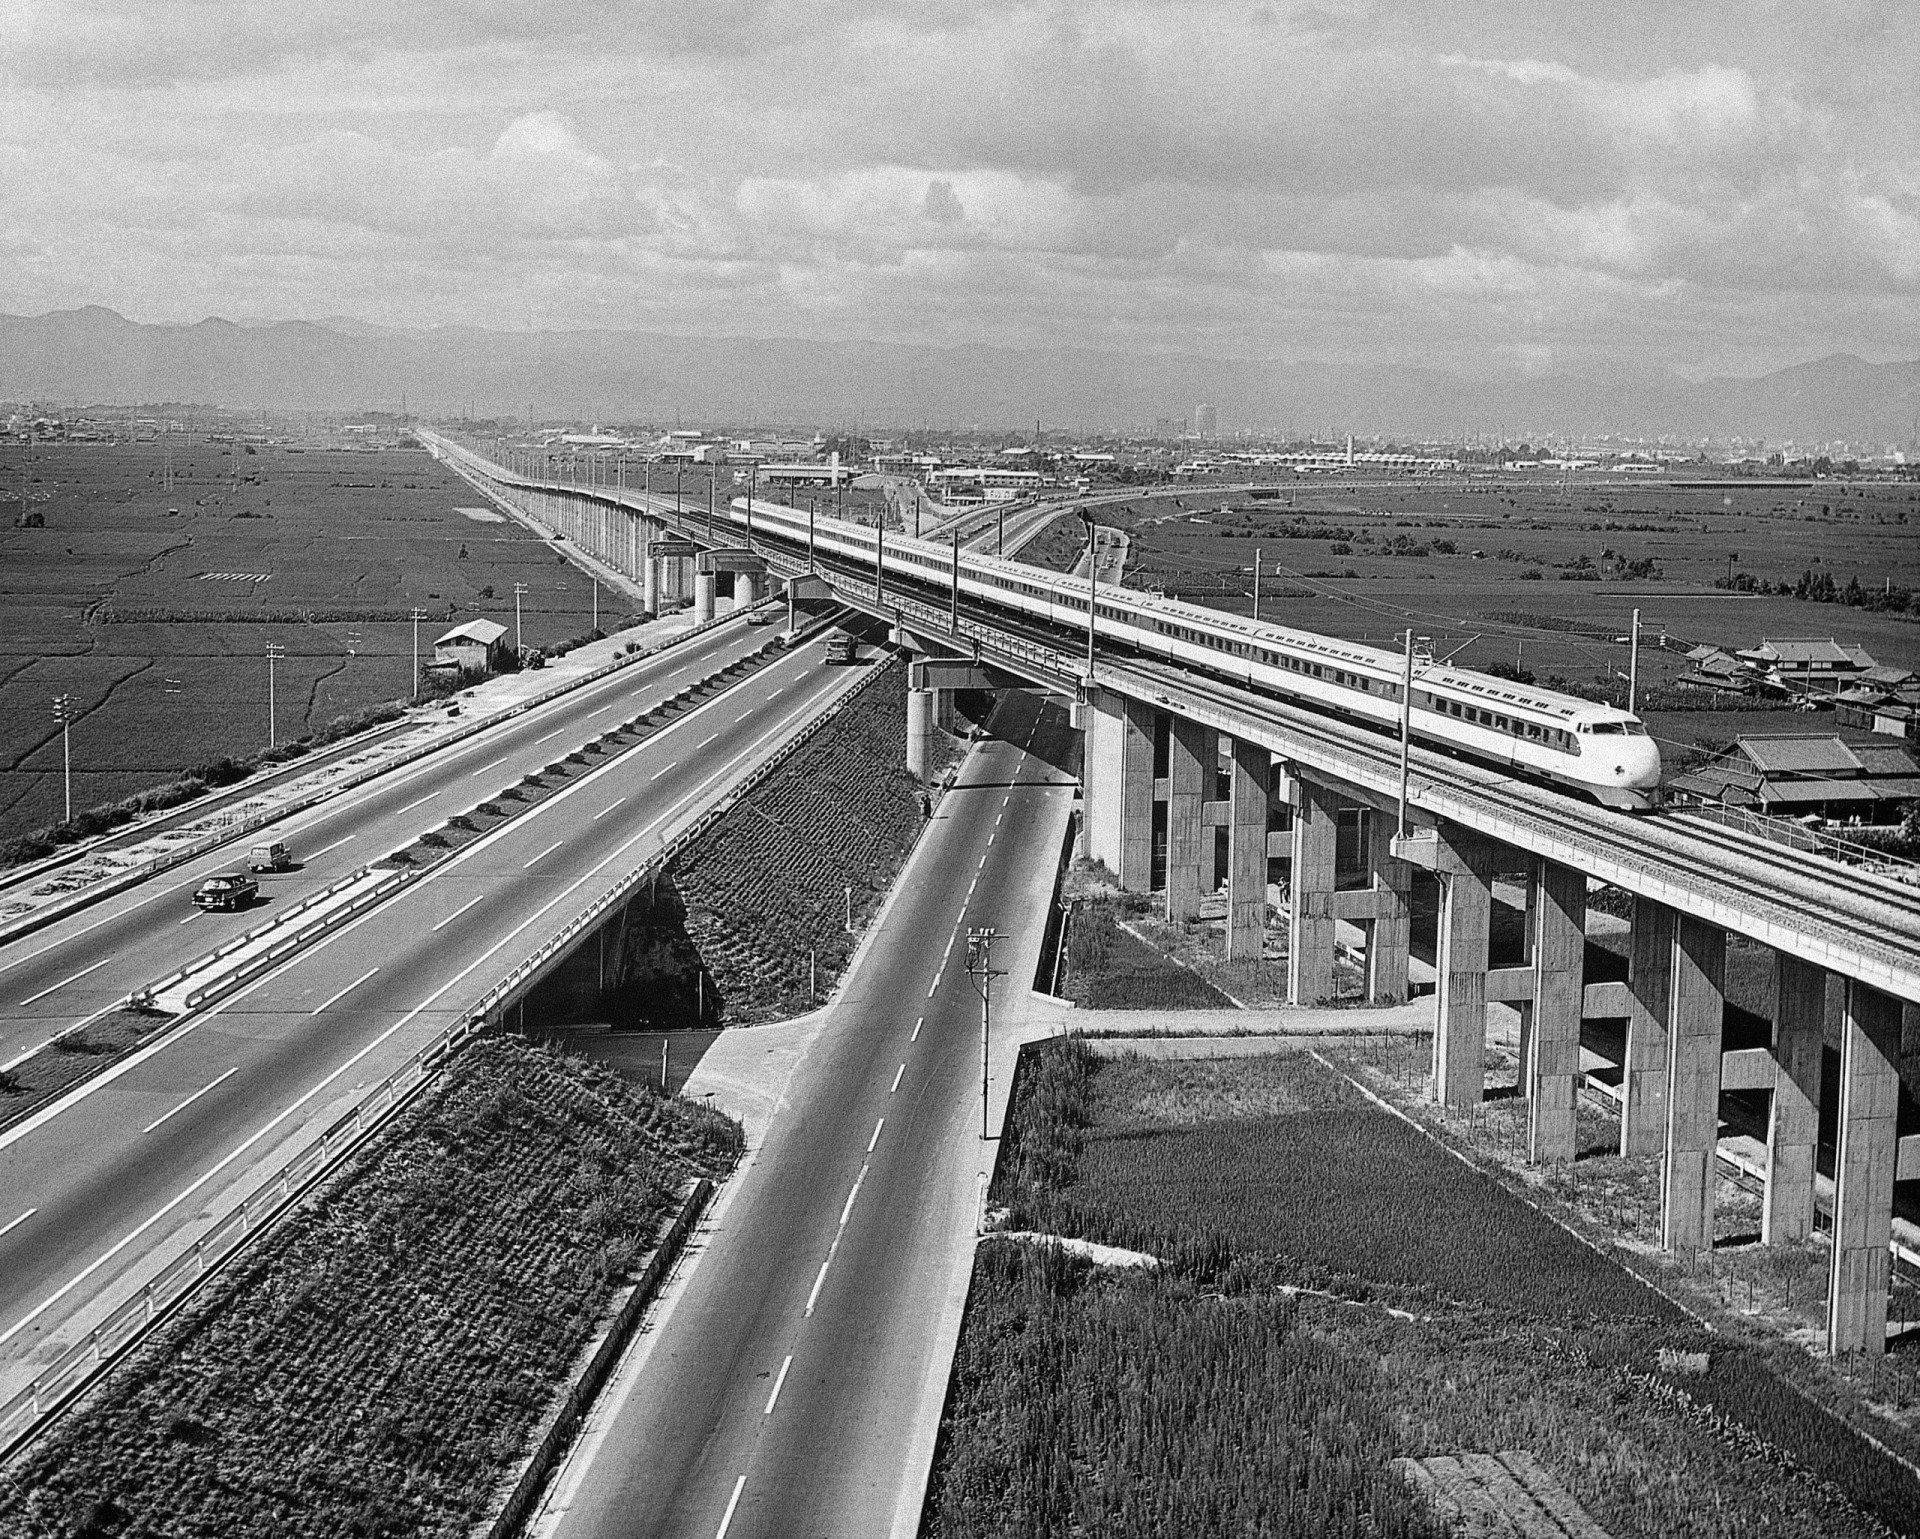 <p>The Meishin Expressway was the first expressway in Japan, opening in 1963. It connects Osaka and Nagoya. The road is pictured in 1965 as the Hikari Super Express train speeds over a rail bridge above.</p><p>You may also like:<a href="https://www.starsinsider.com/n/489768?utm_source=msn.com&utm_medium=display&utm_campaign=referral_description&utm_content=697904en-us"> Things we should stop feeling embarrassed about</a></p>